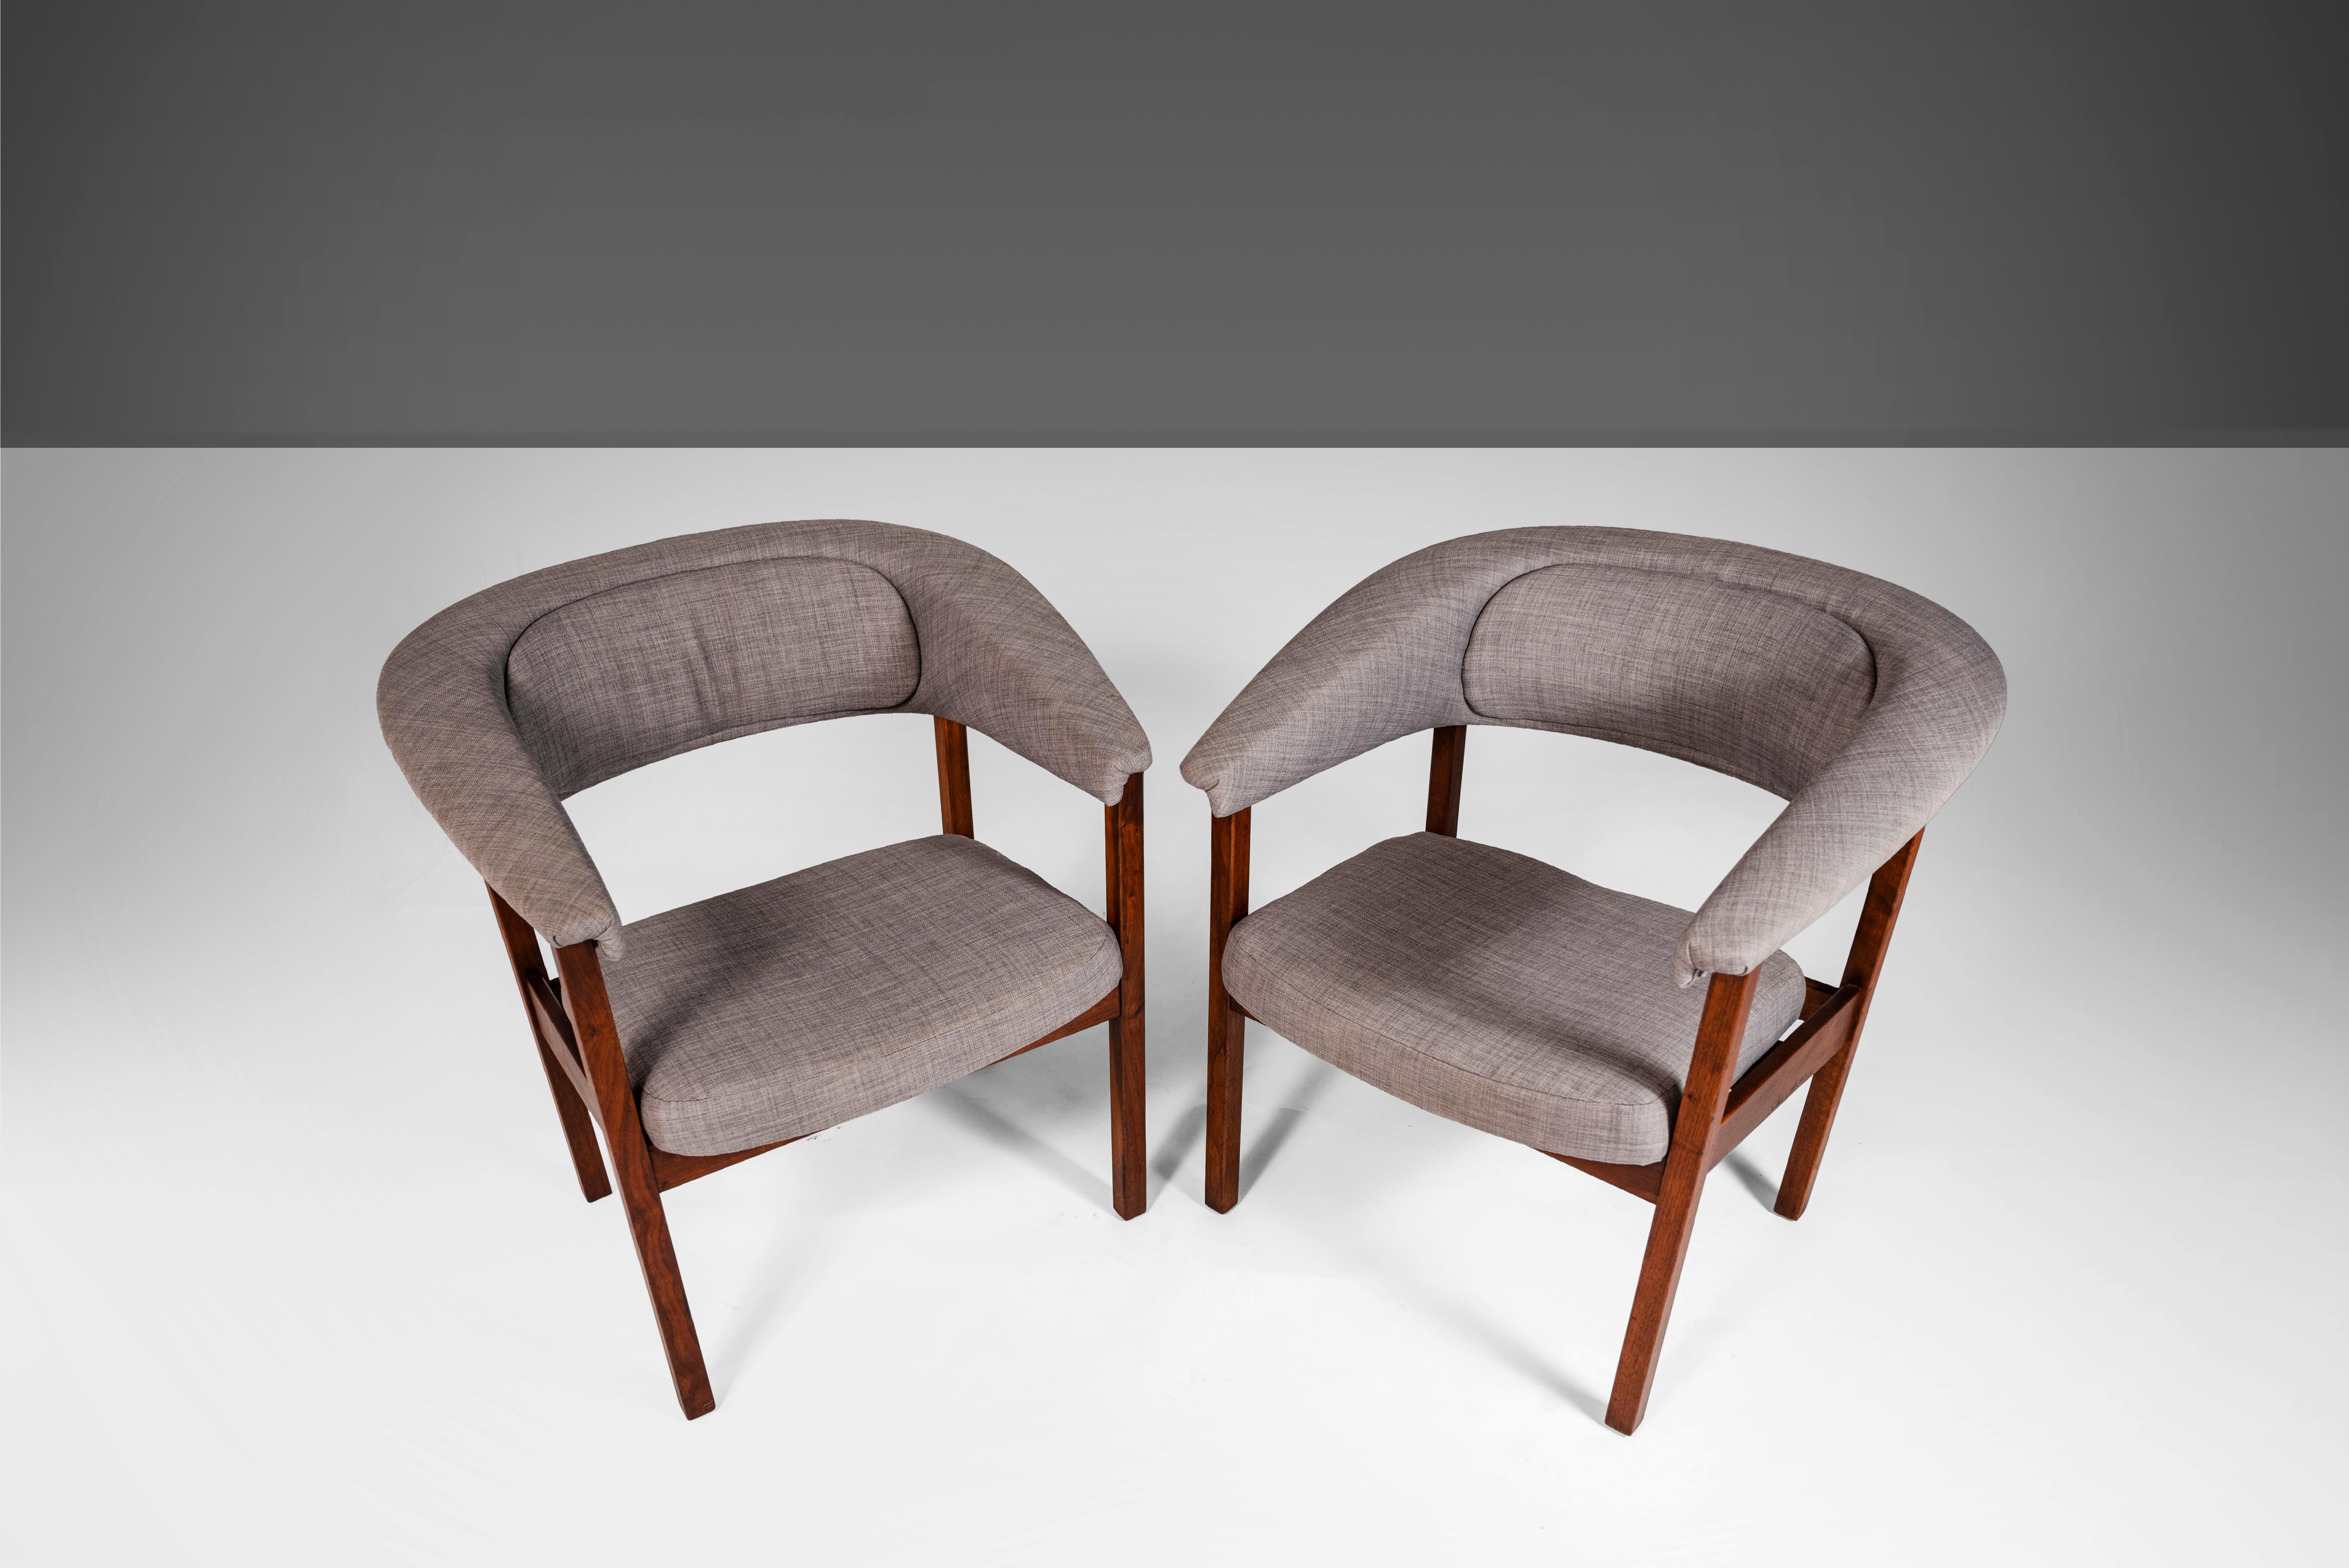 Mid-Century Modern Pair of Chairs by Arthur Umanoff for Madison in Original Knit Fabric, c. 1960s For Sale